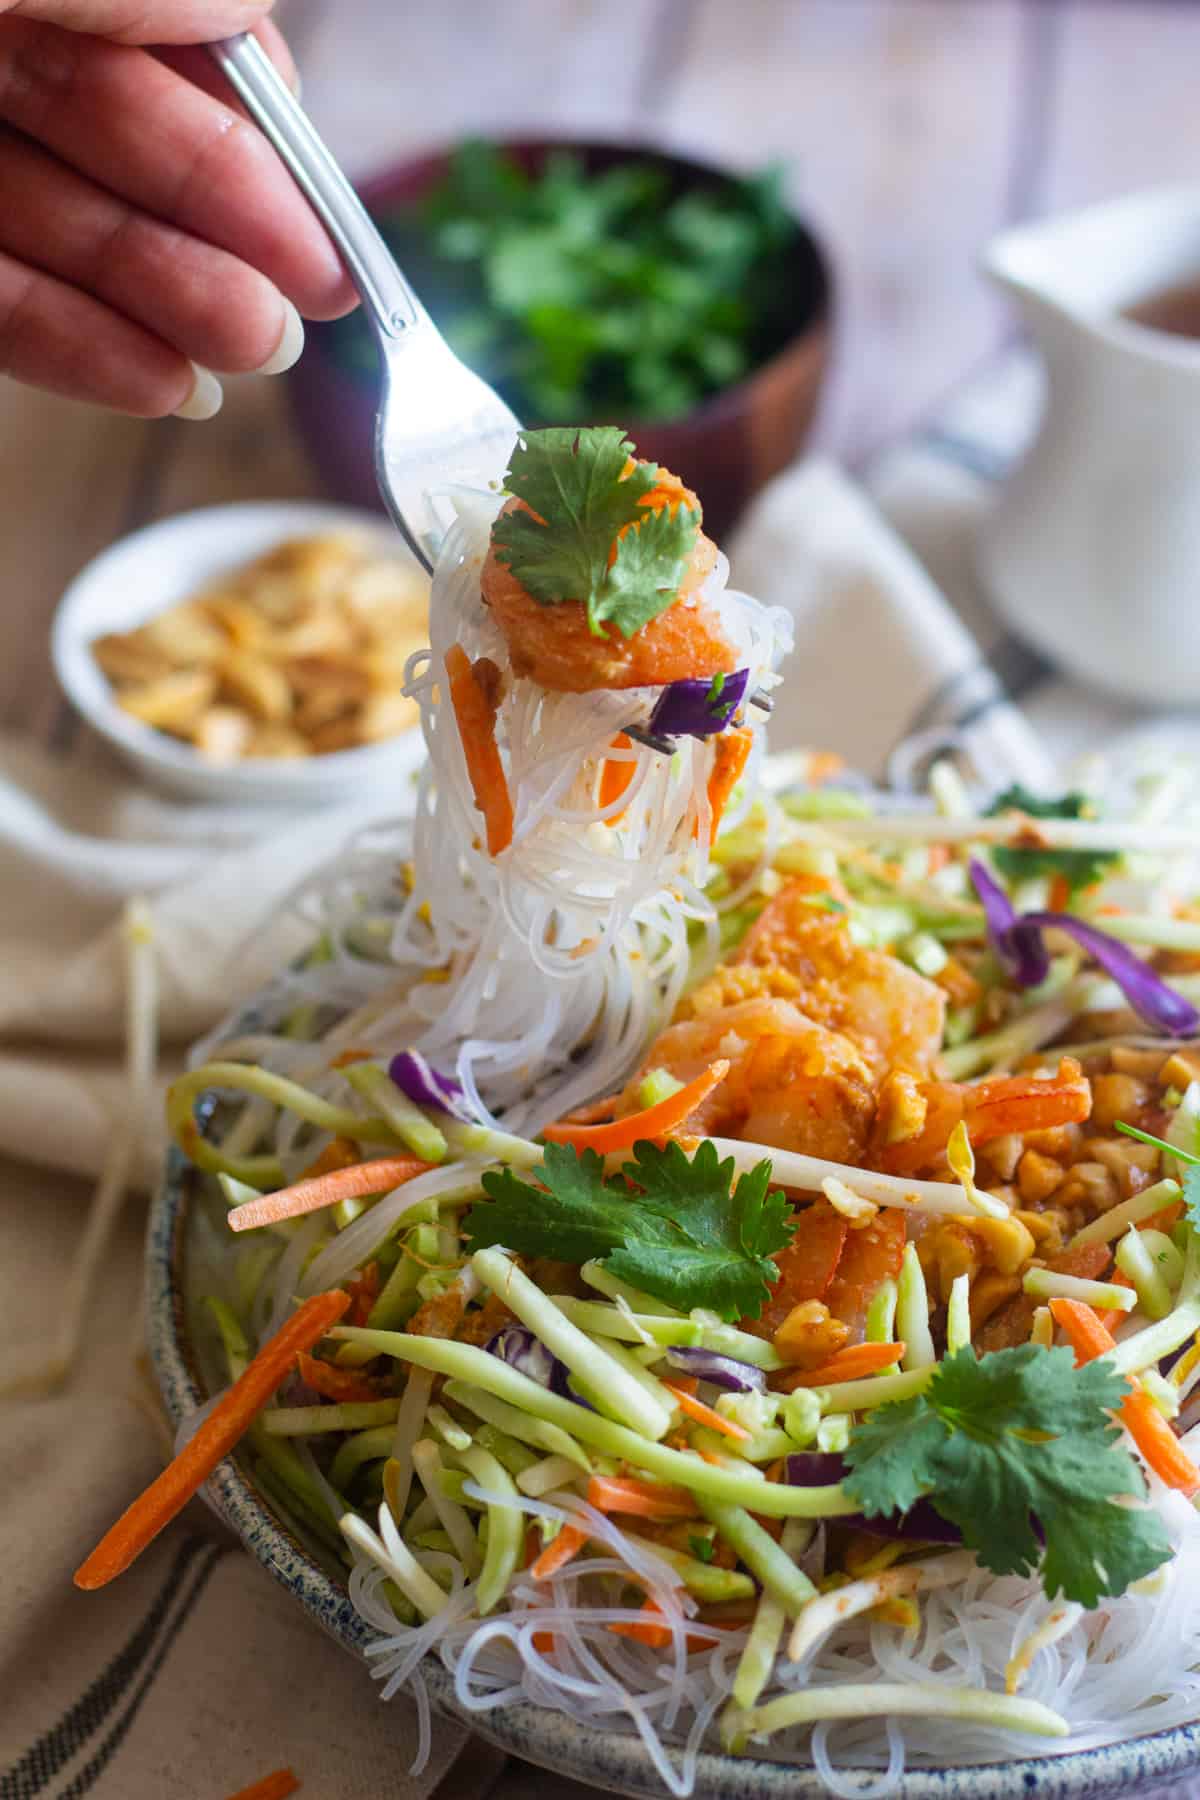 This shrimp noodle salad is ready in only 20 minutes. Packed with so much flavor, this would be a perfectly healthy weeknight dinner.
